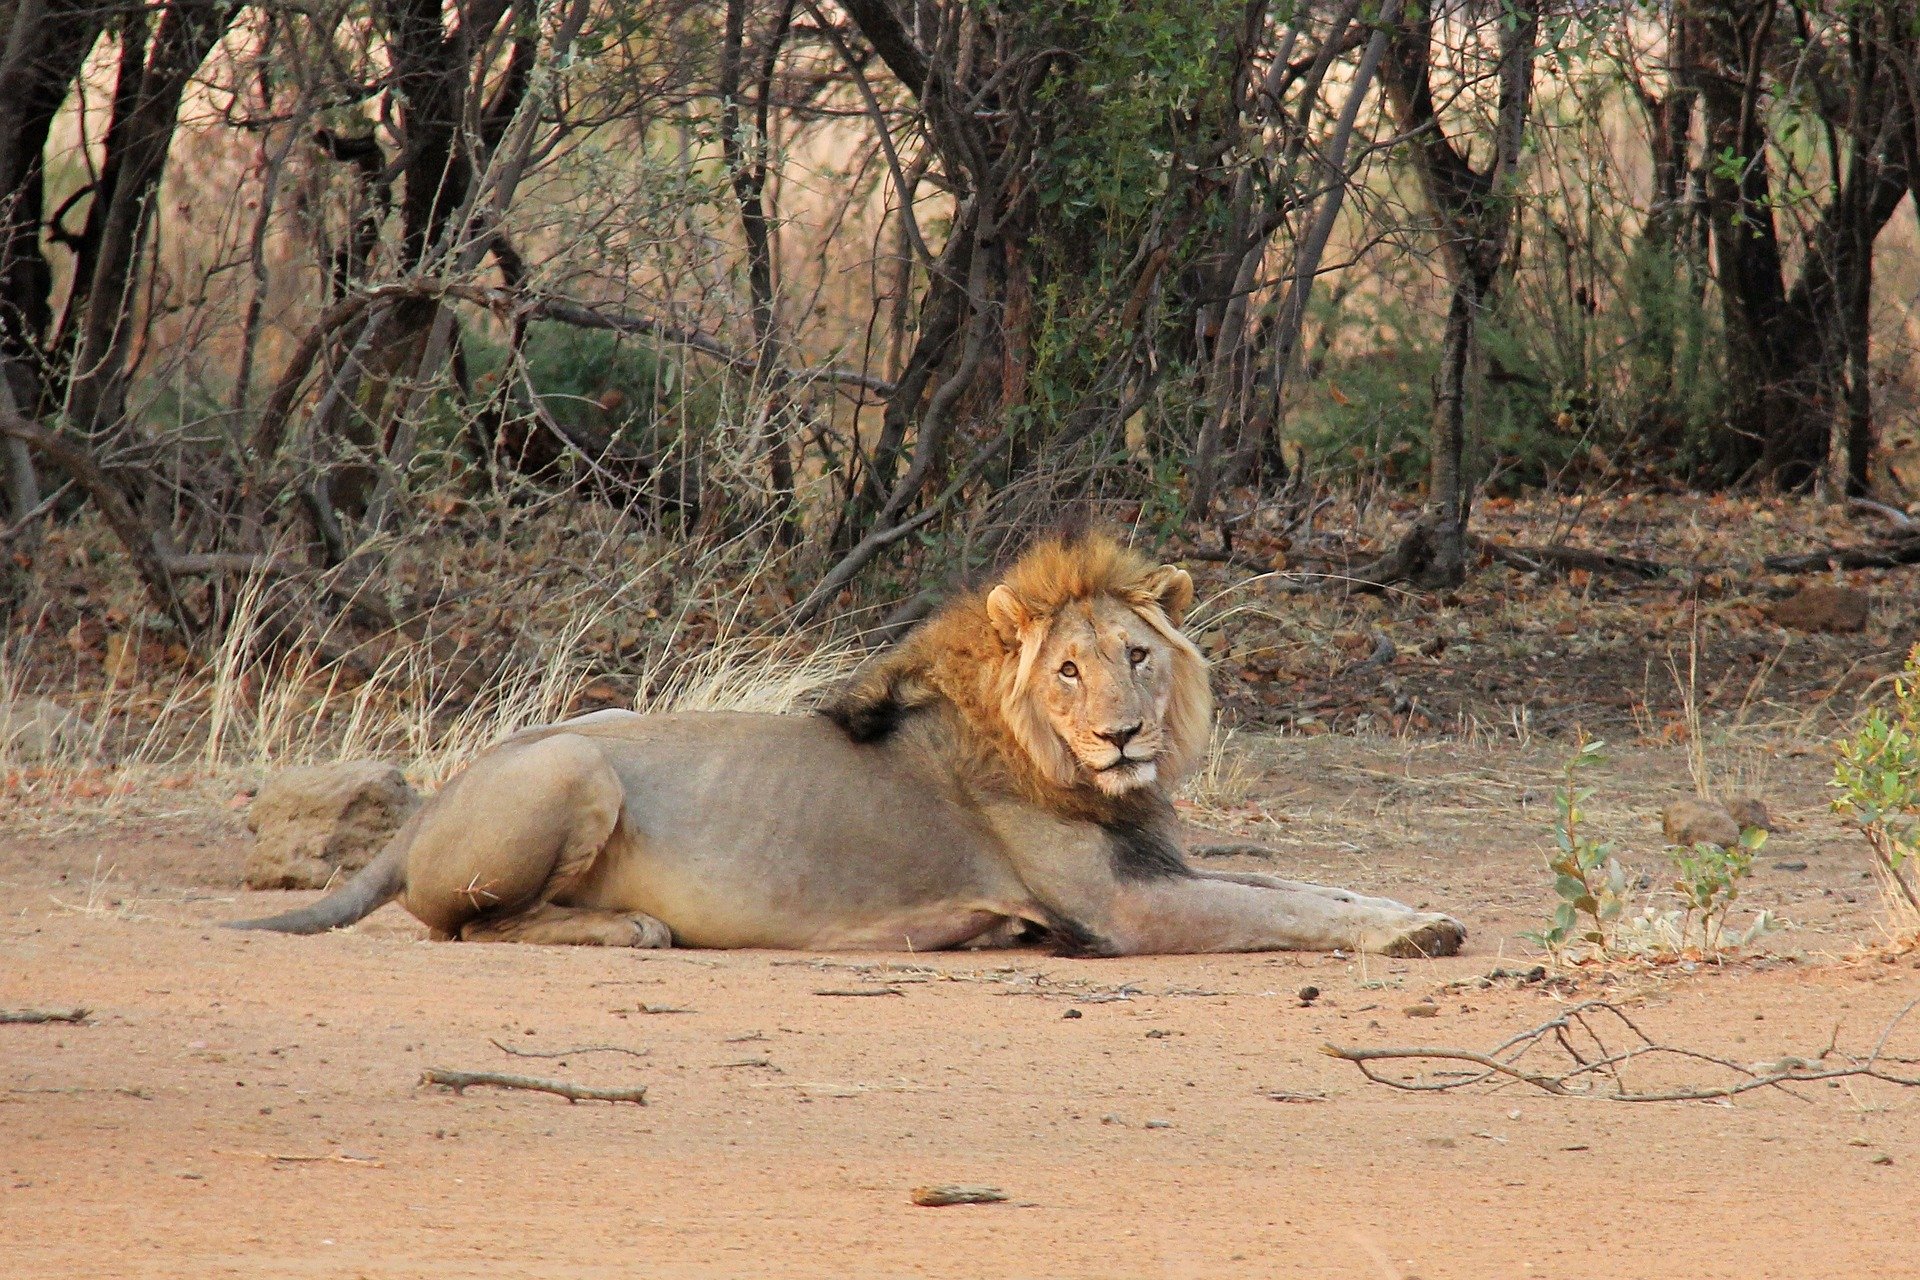 Lion laying down on the ground.